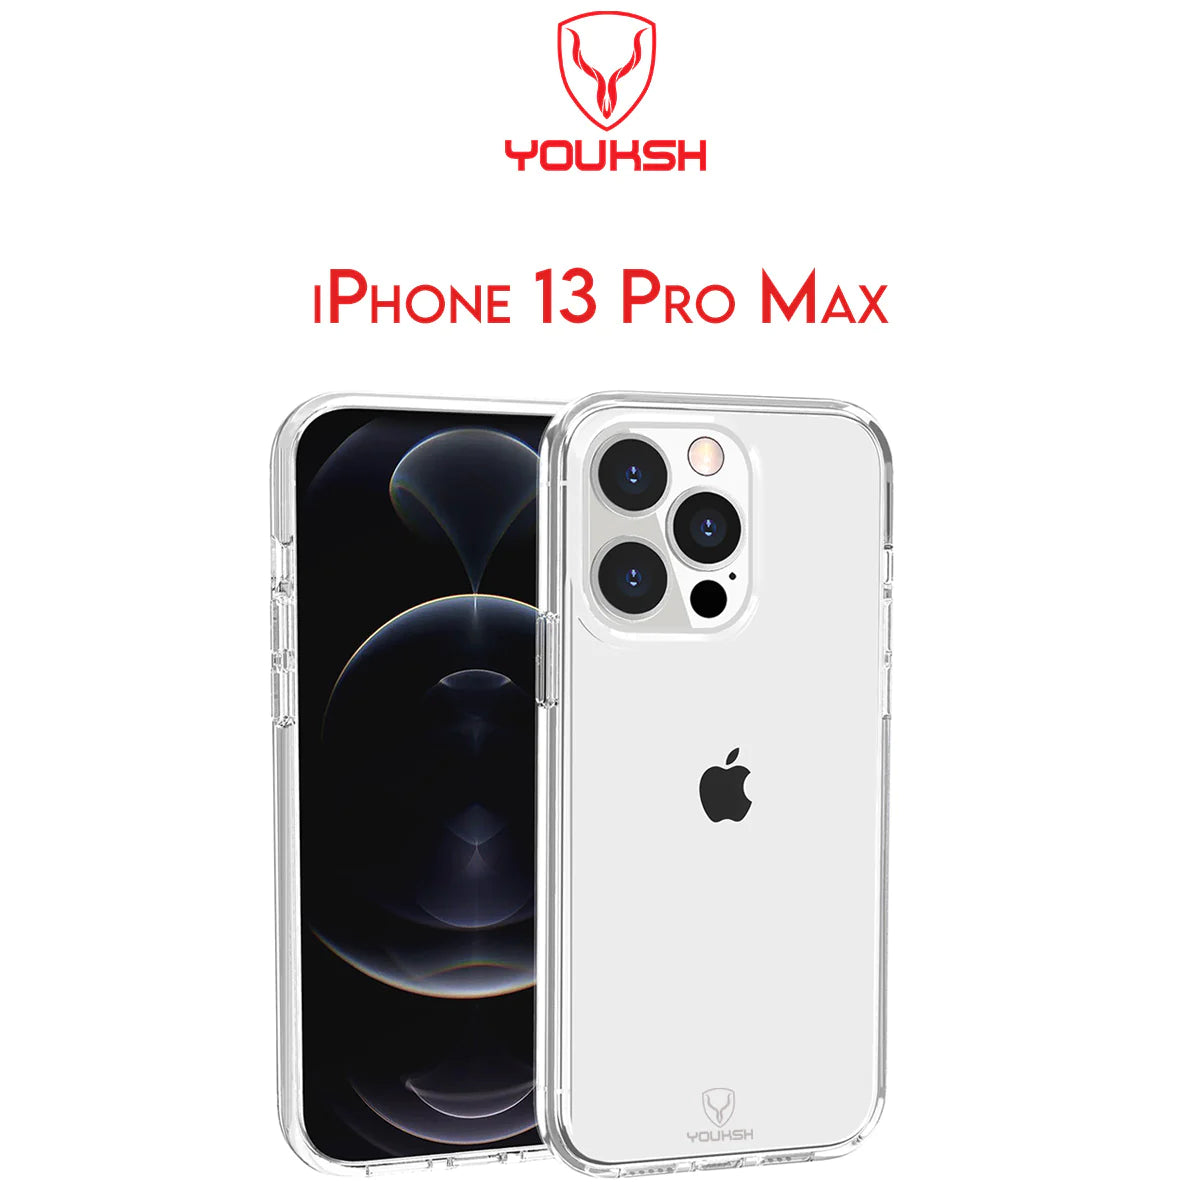 YOUKSH Apple iPhone 13 Pro Max Transparent Case | Soft Shock Proof Jelly Cover